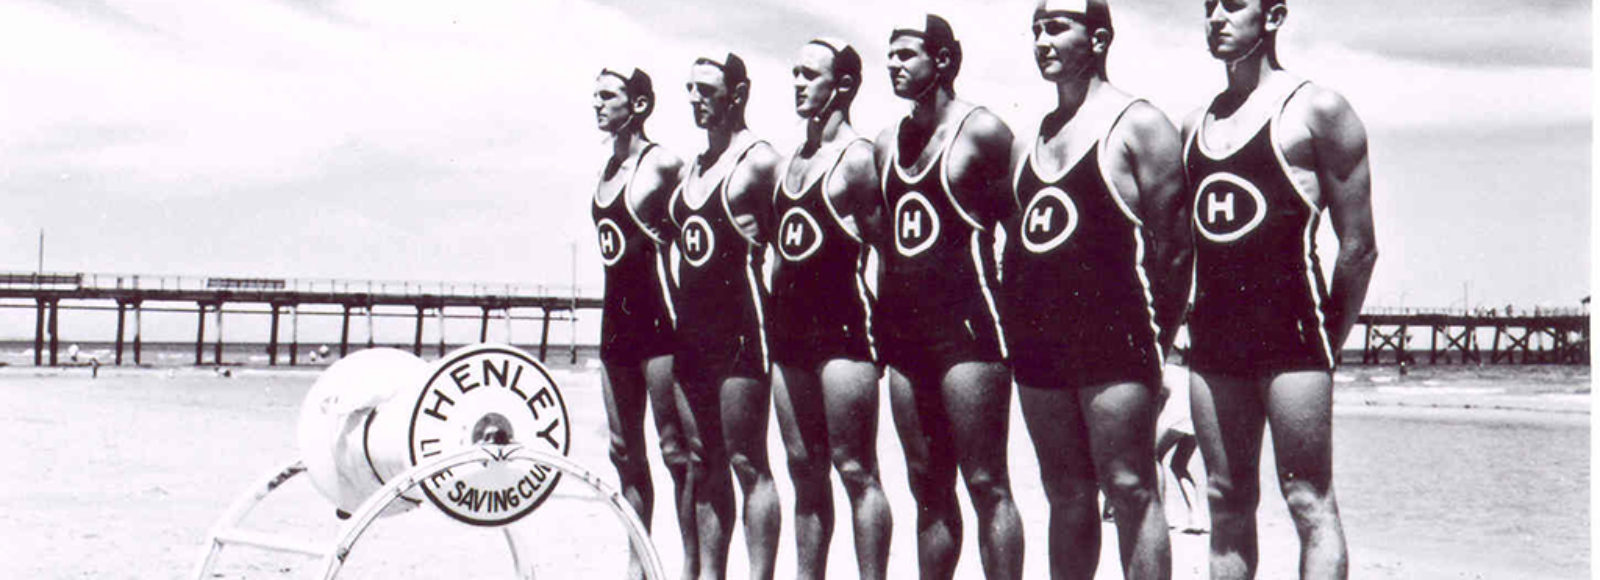 Image: six life savers standing in a row on a beach